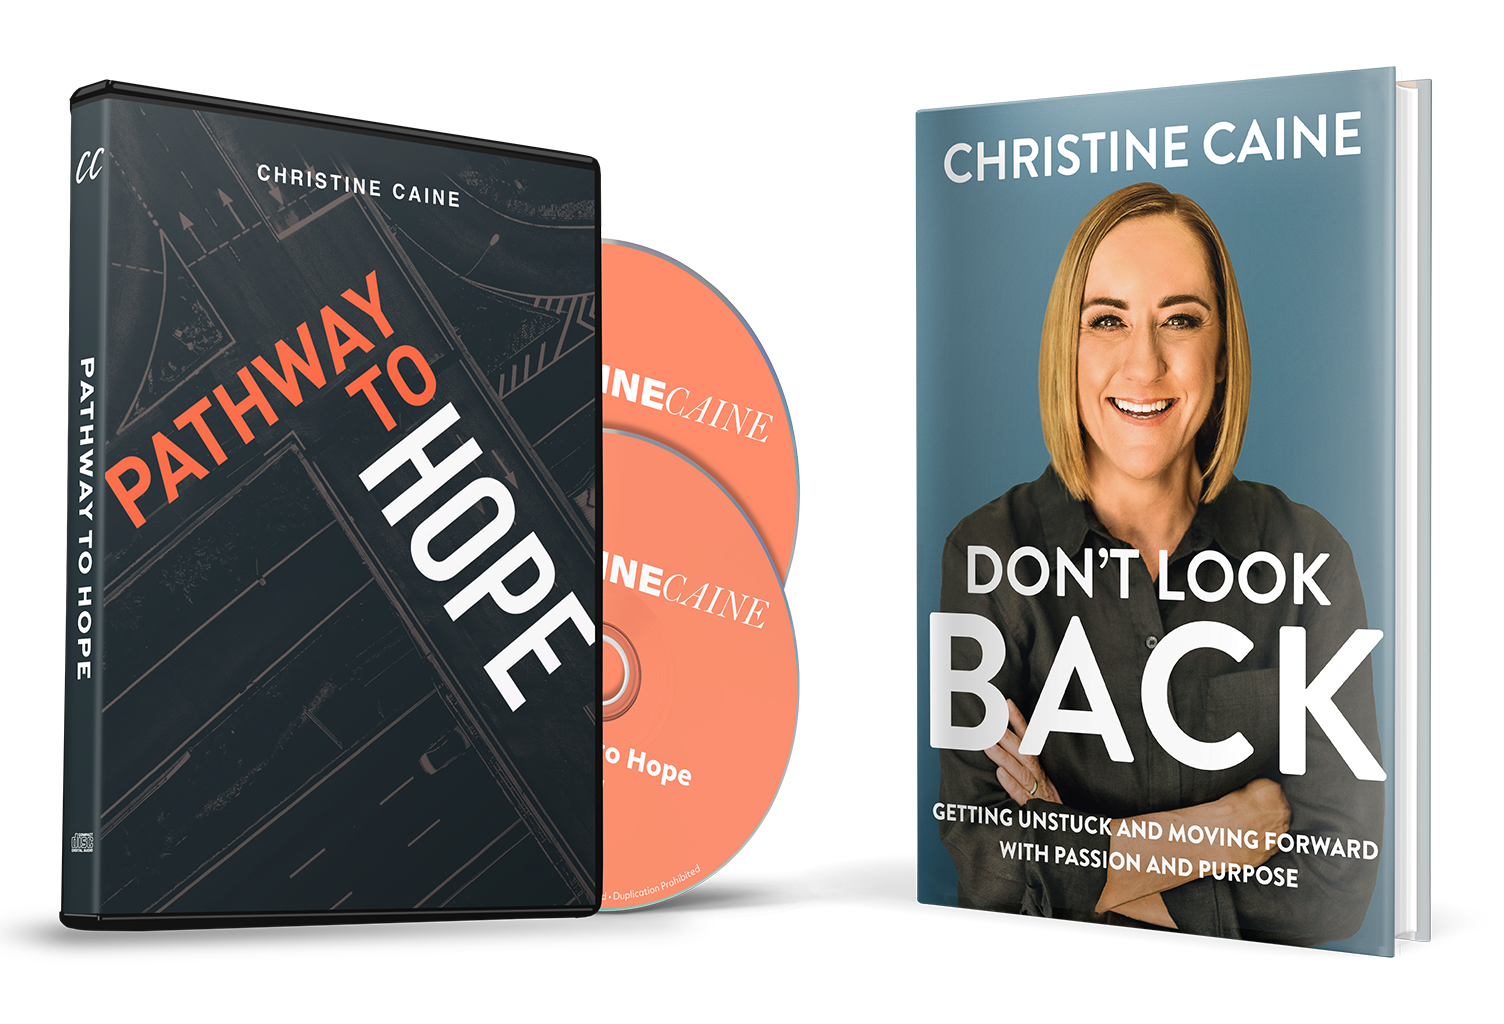 Pathway To Hope + Don't Look Back by Christine Caine by TBN